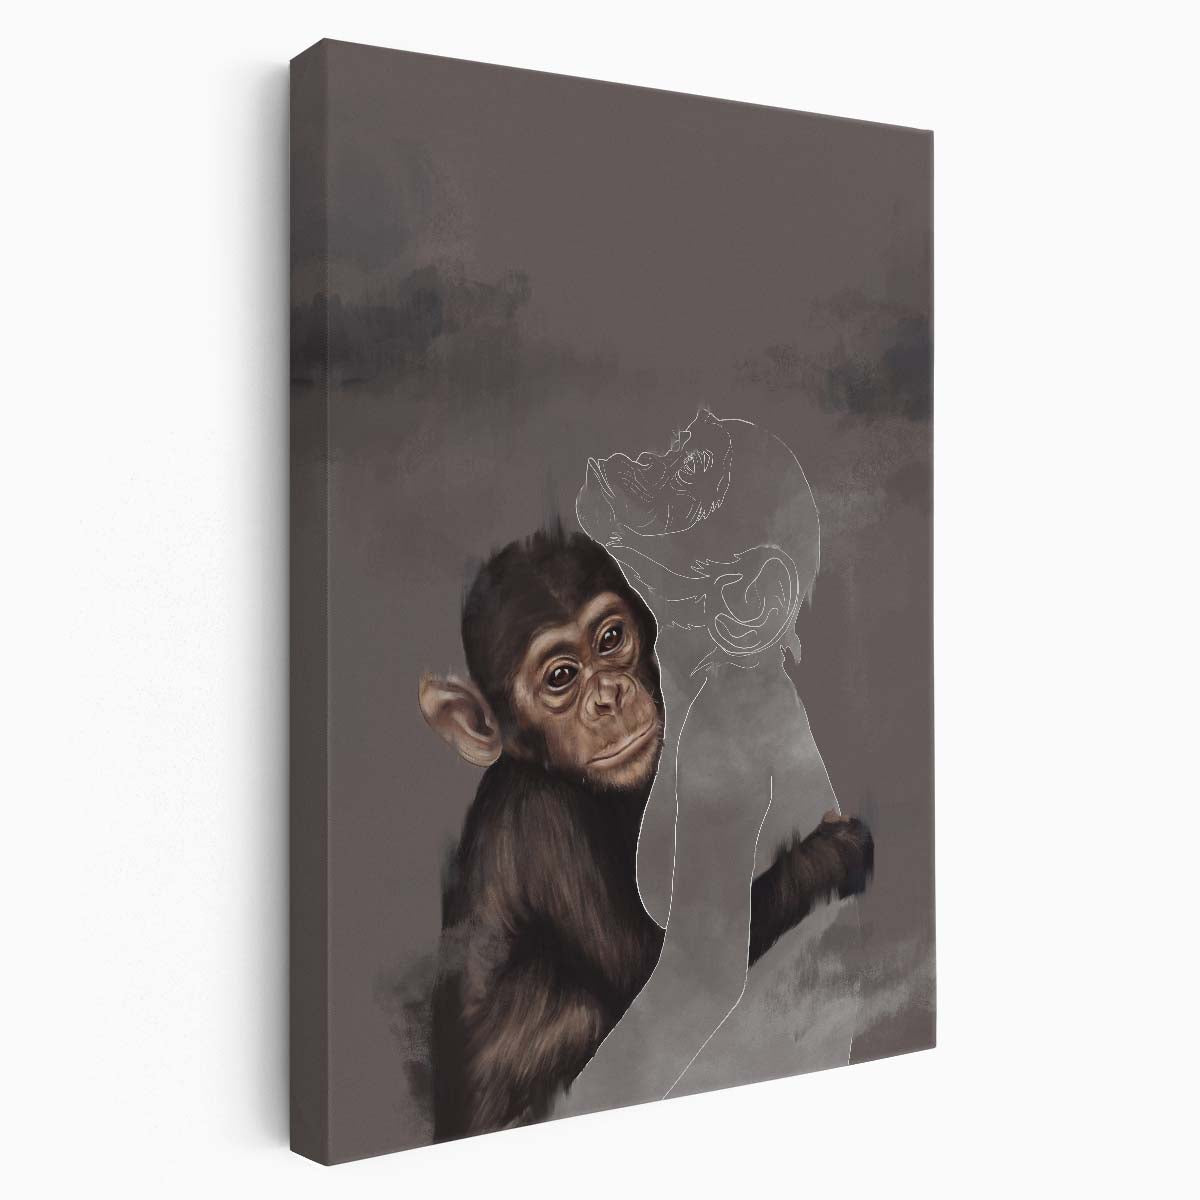 Cute Chimp Siblings Embrace Watercolor Illustration Wall Art by Luxuriance Designs, made in USA